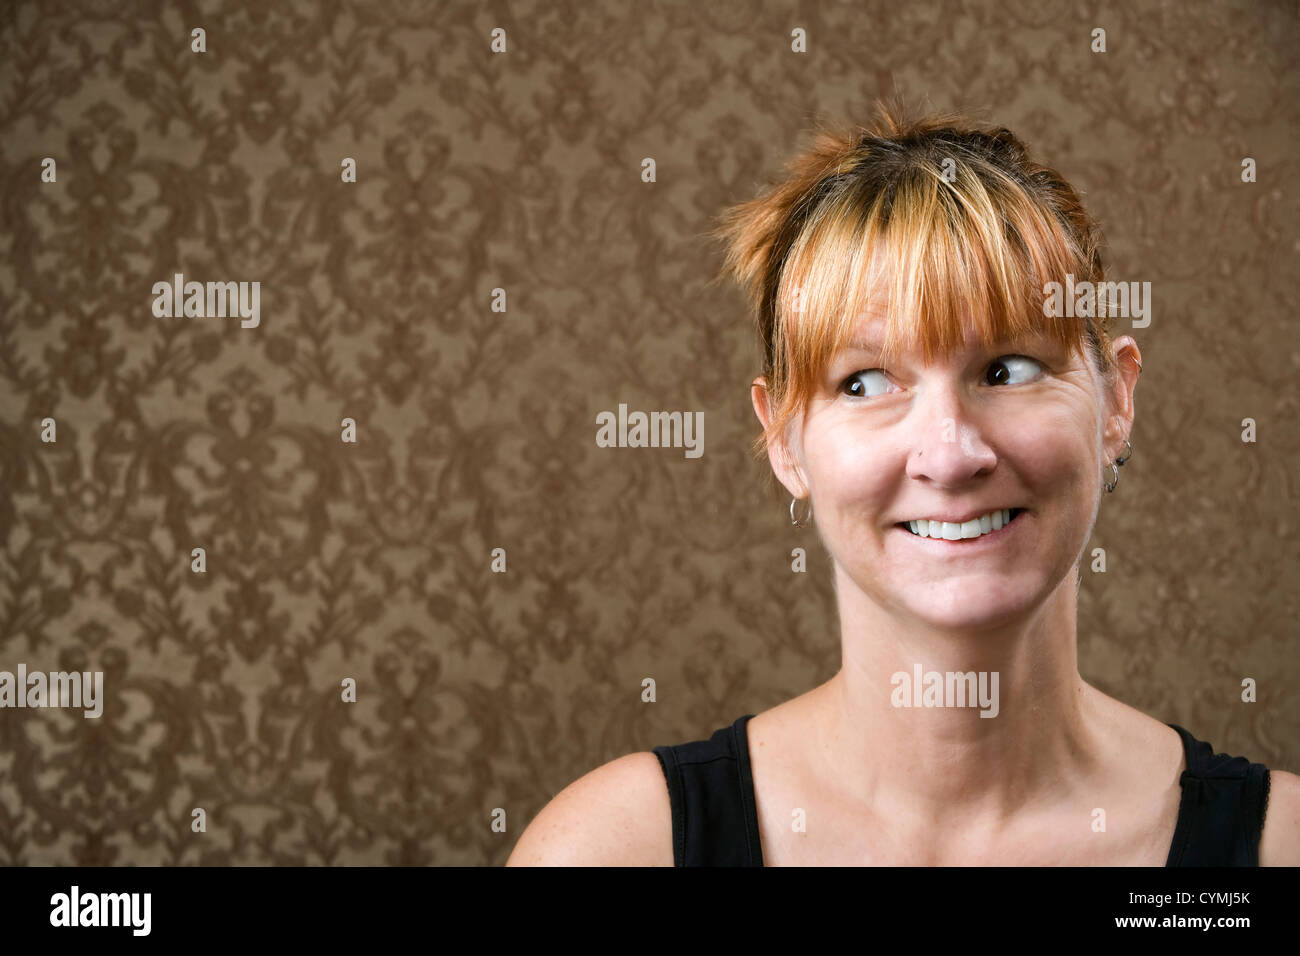 Pretty woman smiling in front of a gold-flocked wallpaper background Stock Photo